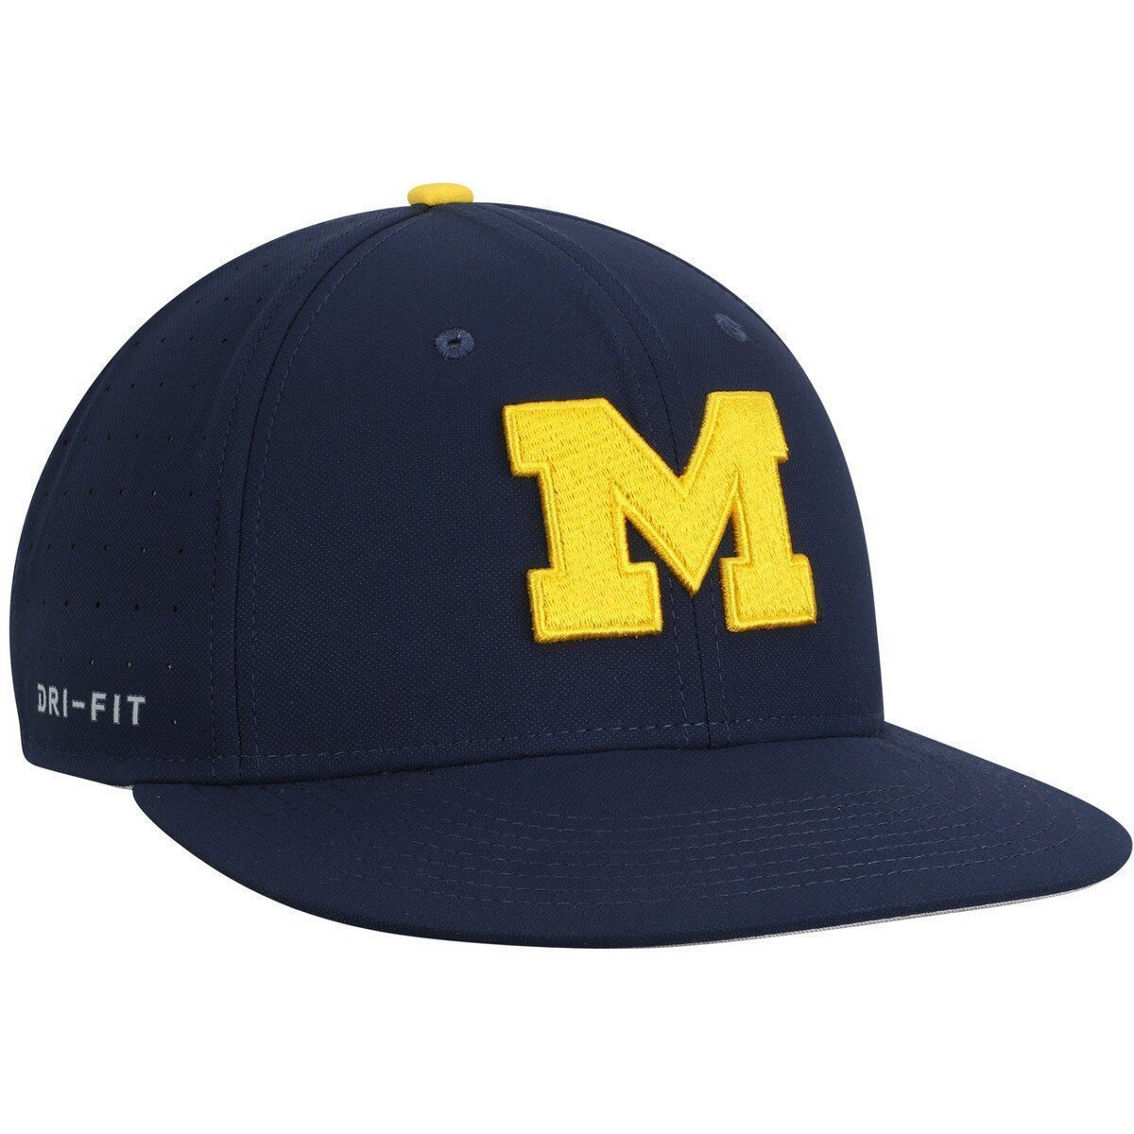 Nike Men's Navy Michigan Wolverines Aerobill Performance True Fitted Hat - Image 3 of 4